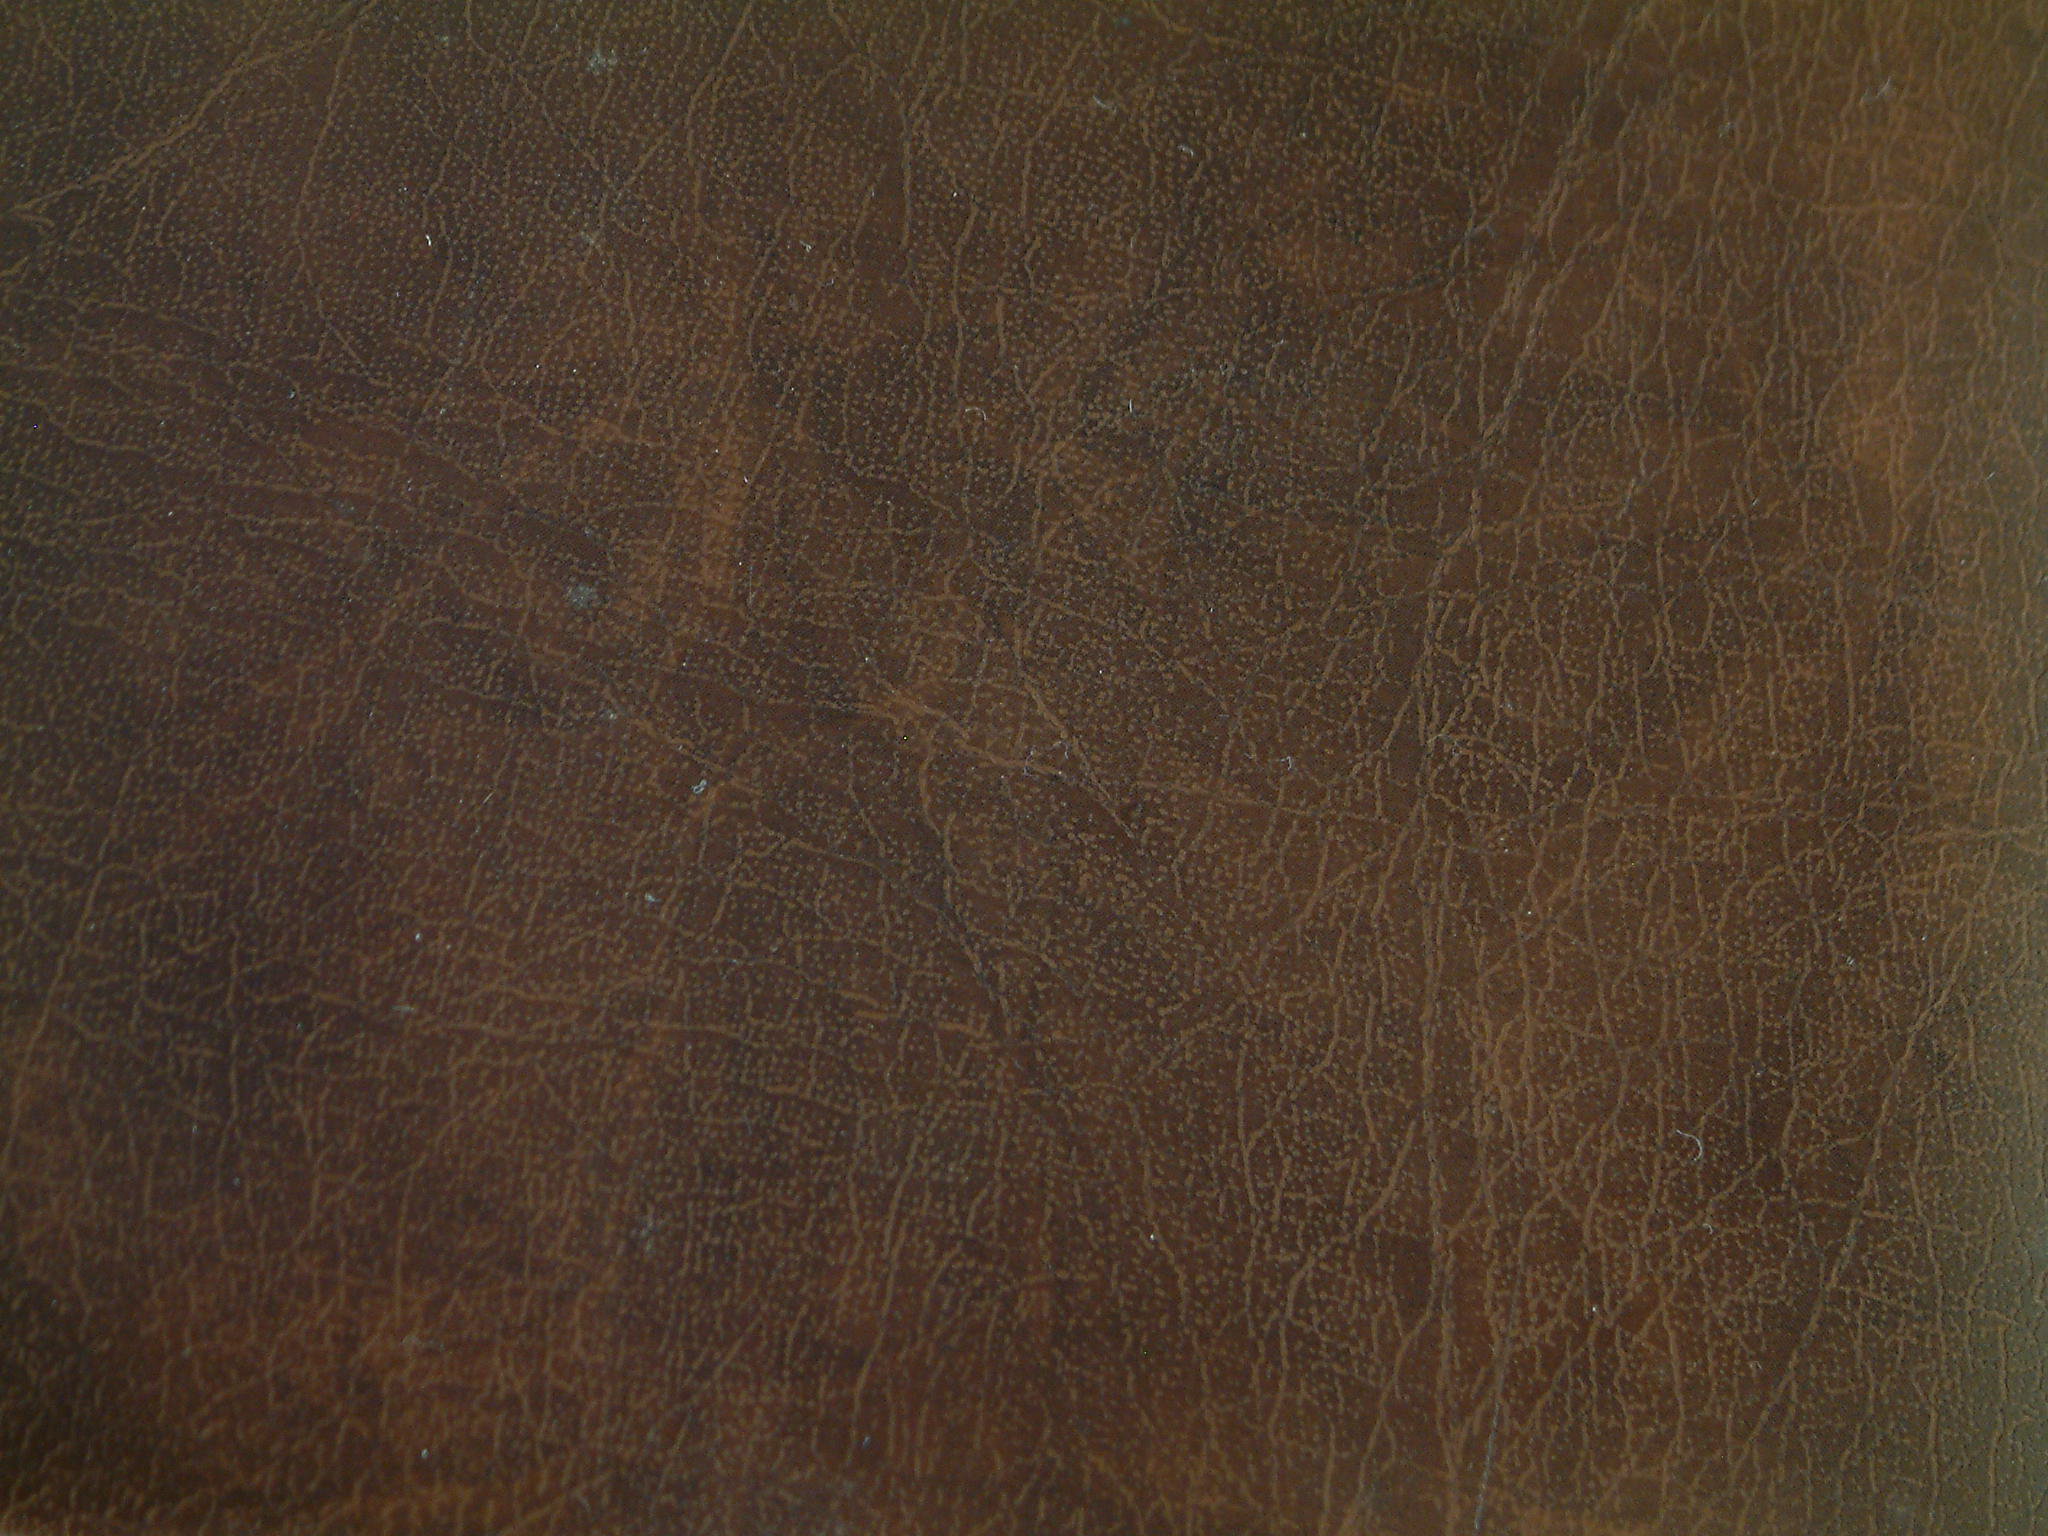 Old Style Leather Texture Photo